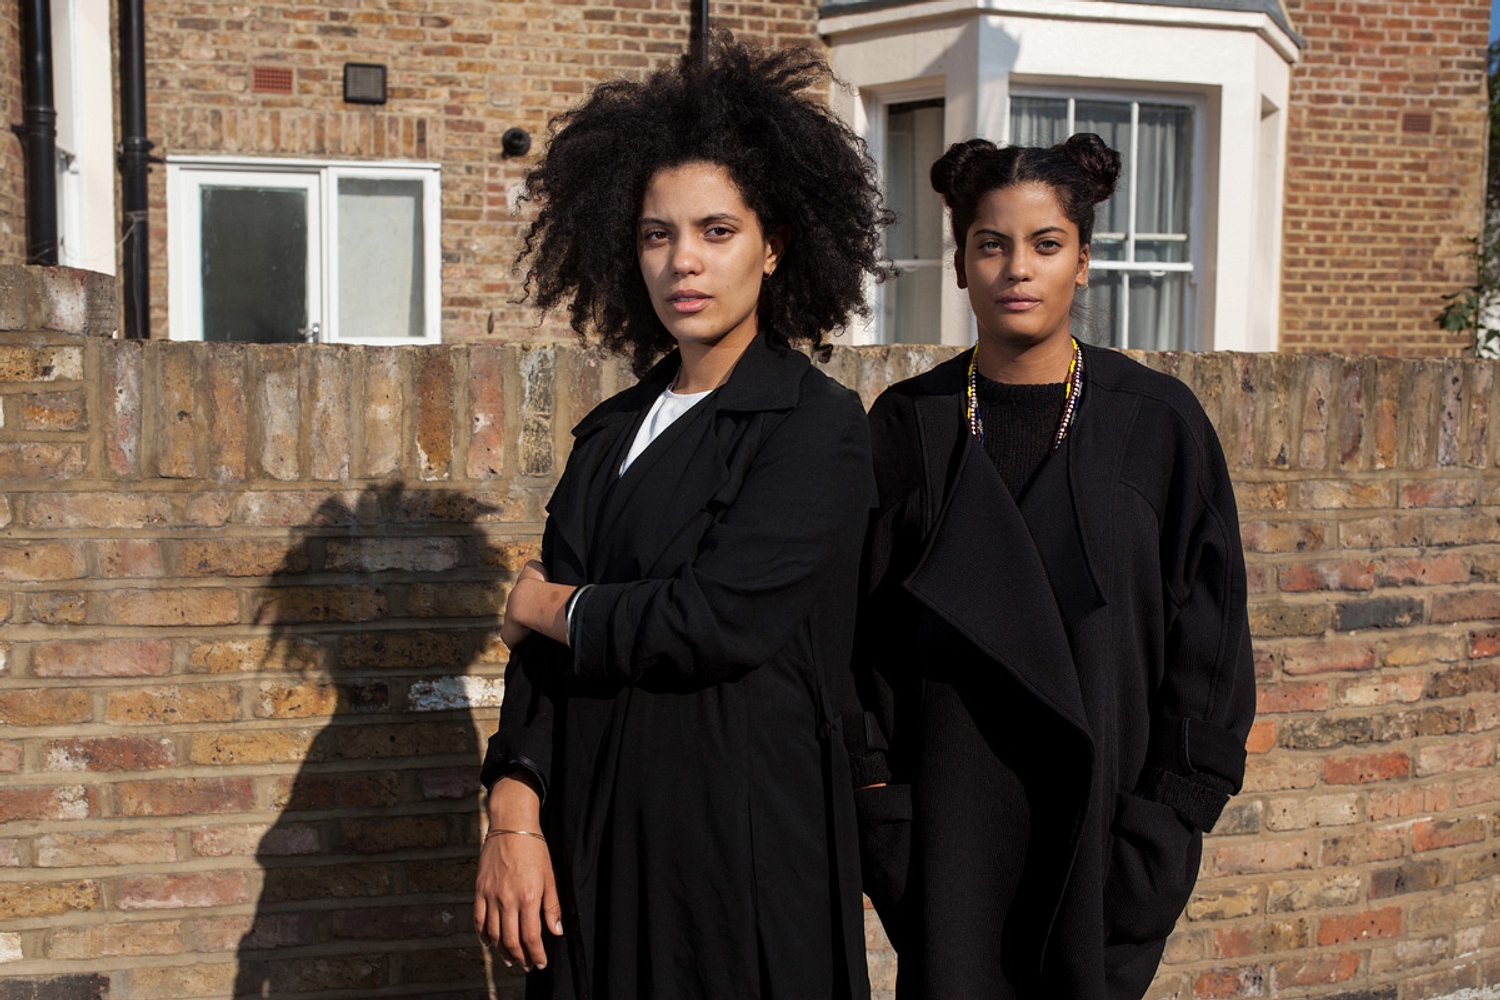 Ibeyi: "I feel like our father is looking over us"